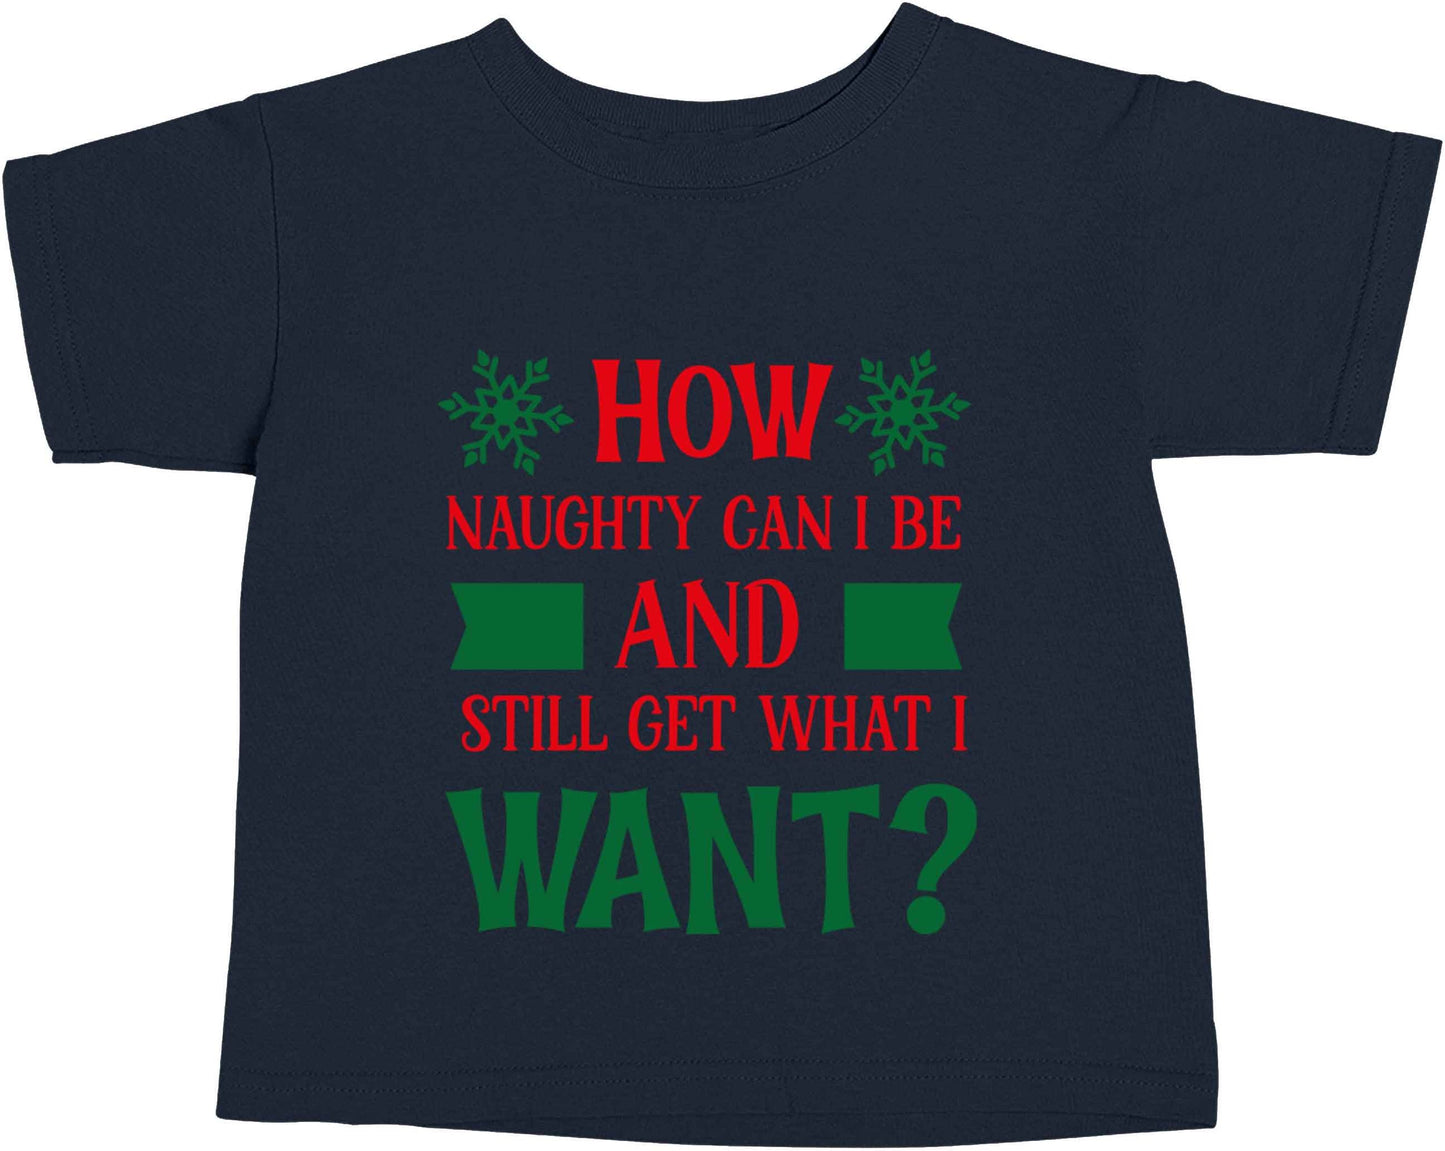 How naughty can I be and still get what I want? navy baby toddler Tshirt 2 Years